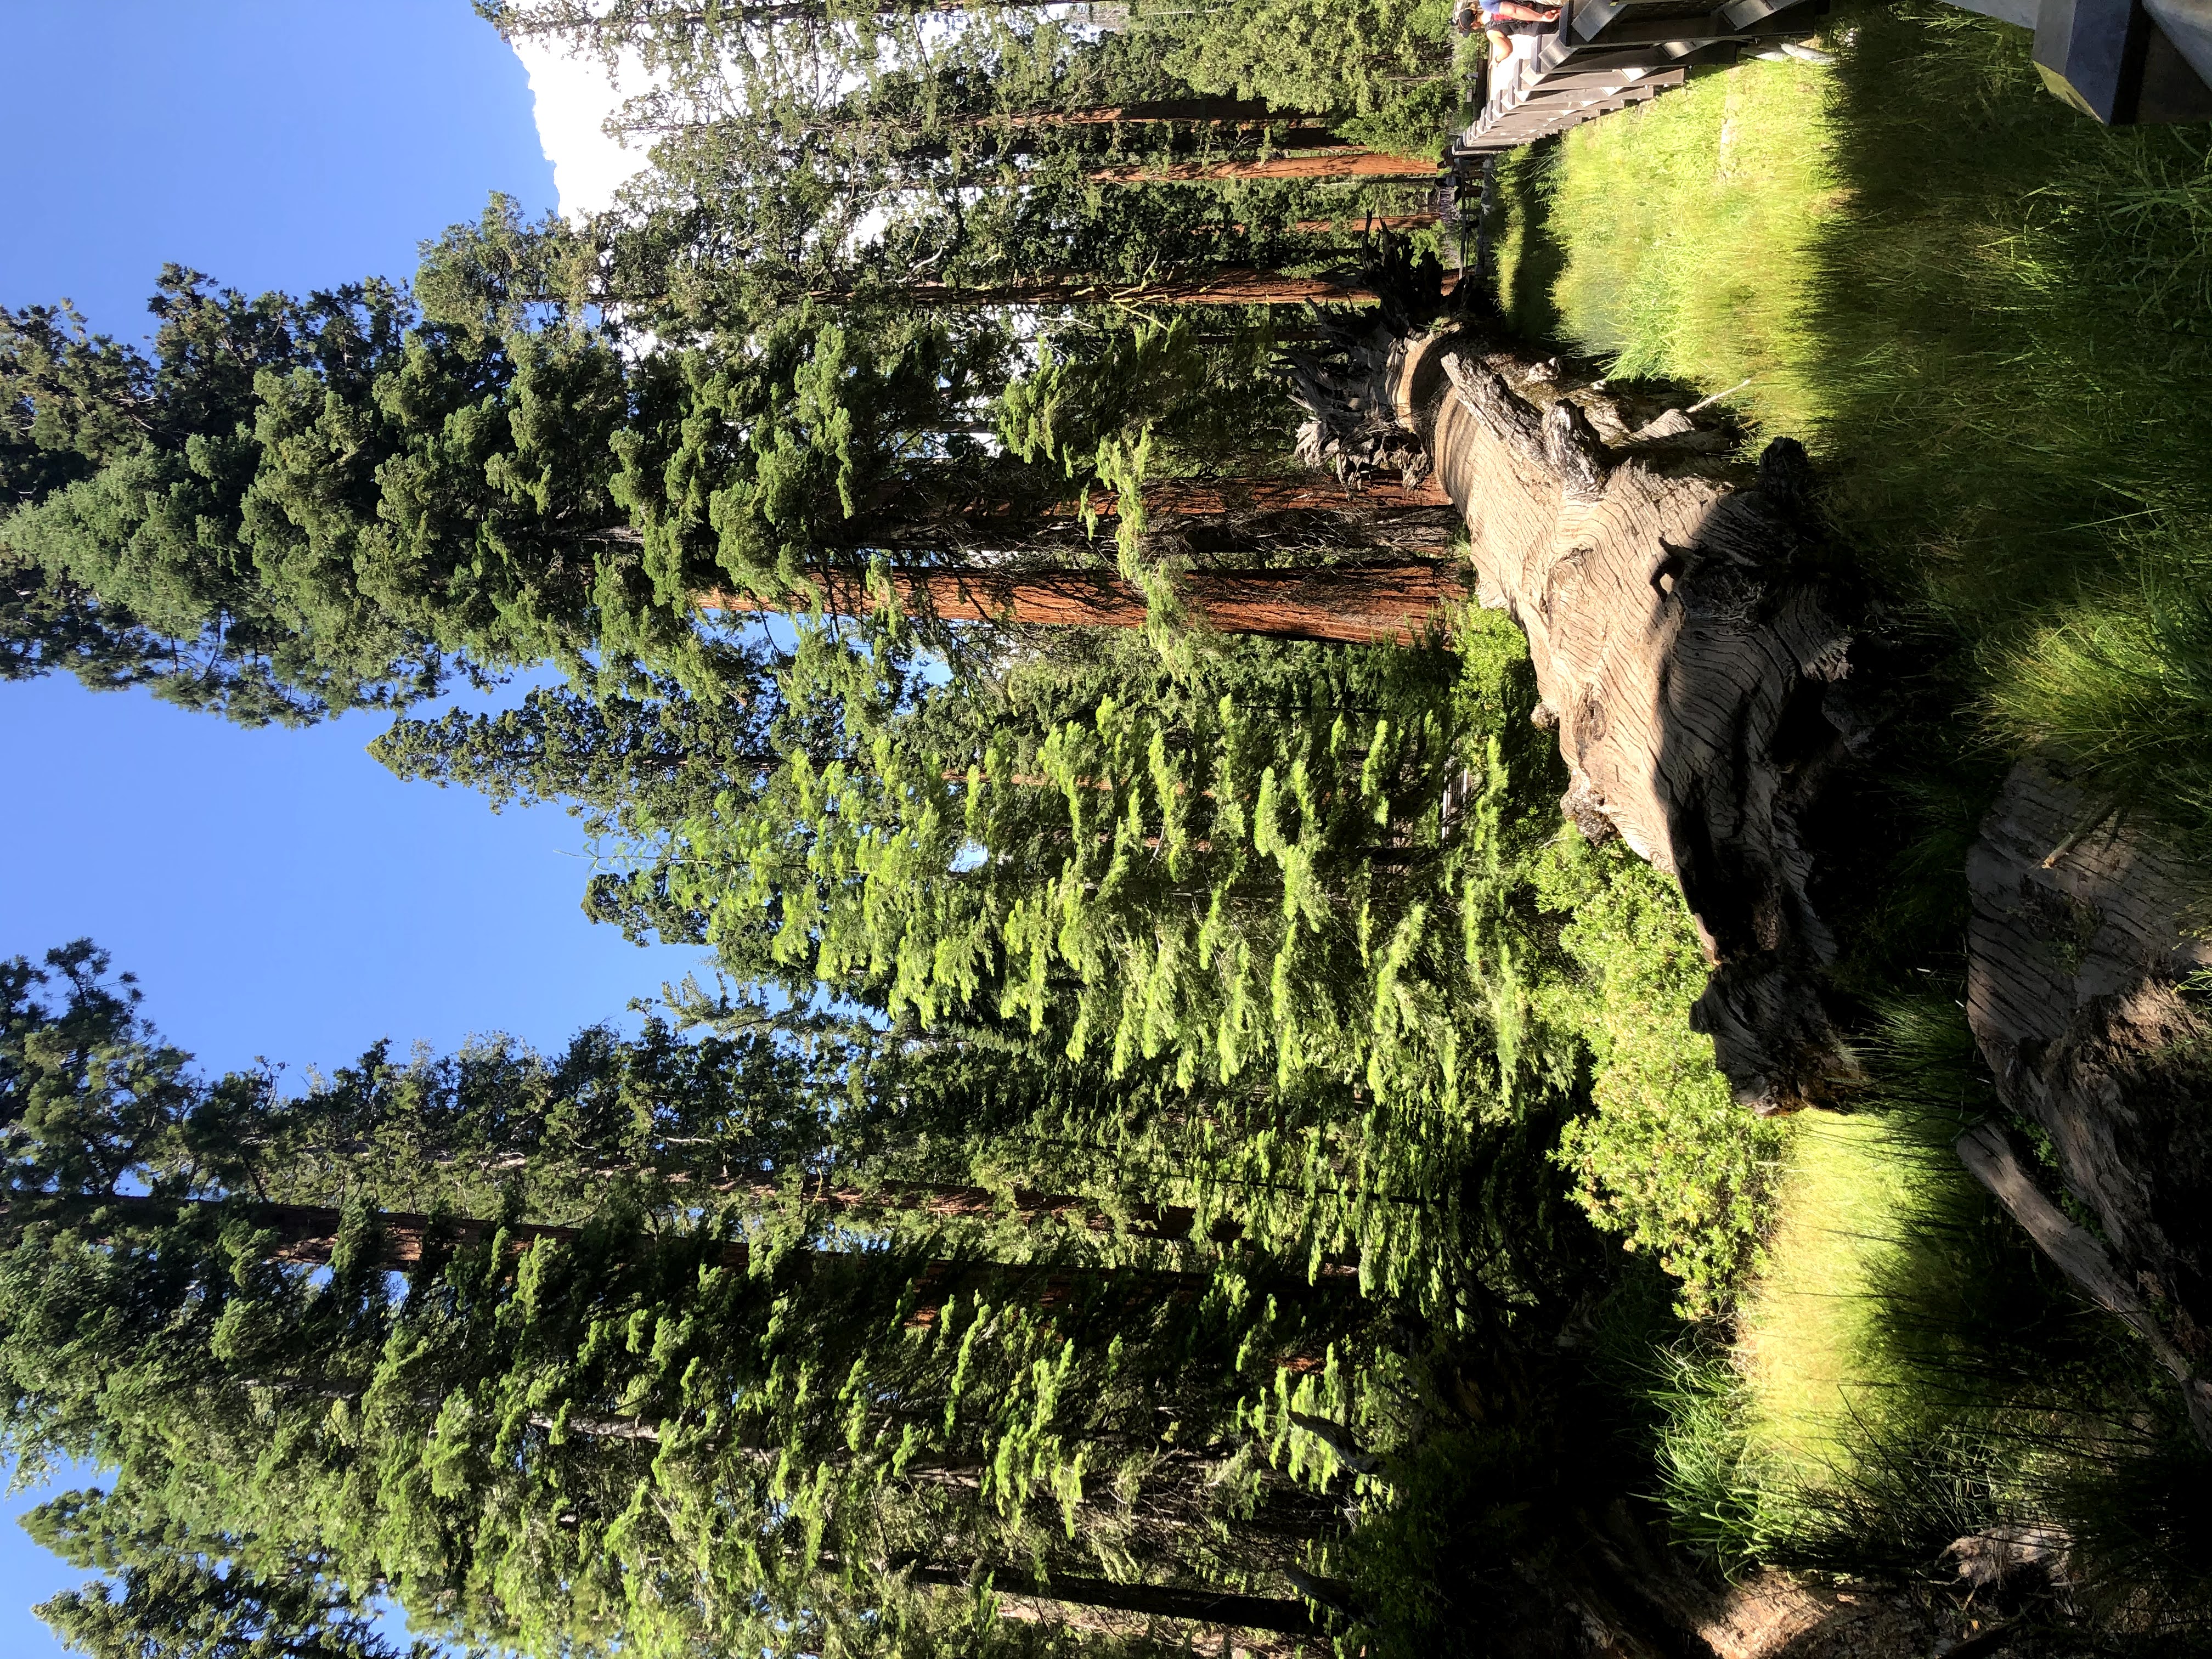 Fallen sequoia in the Mariposa grove. Biggest trees I have ever seen, but not necessarily worth the walk given limited time to explore Yosemite